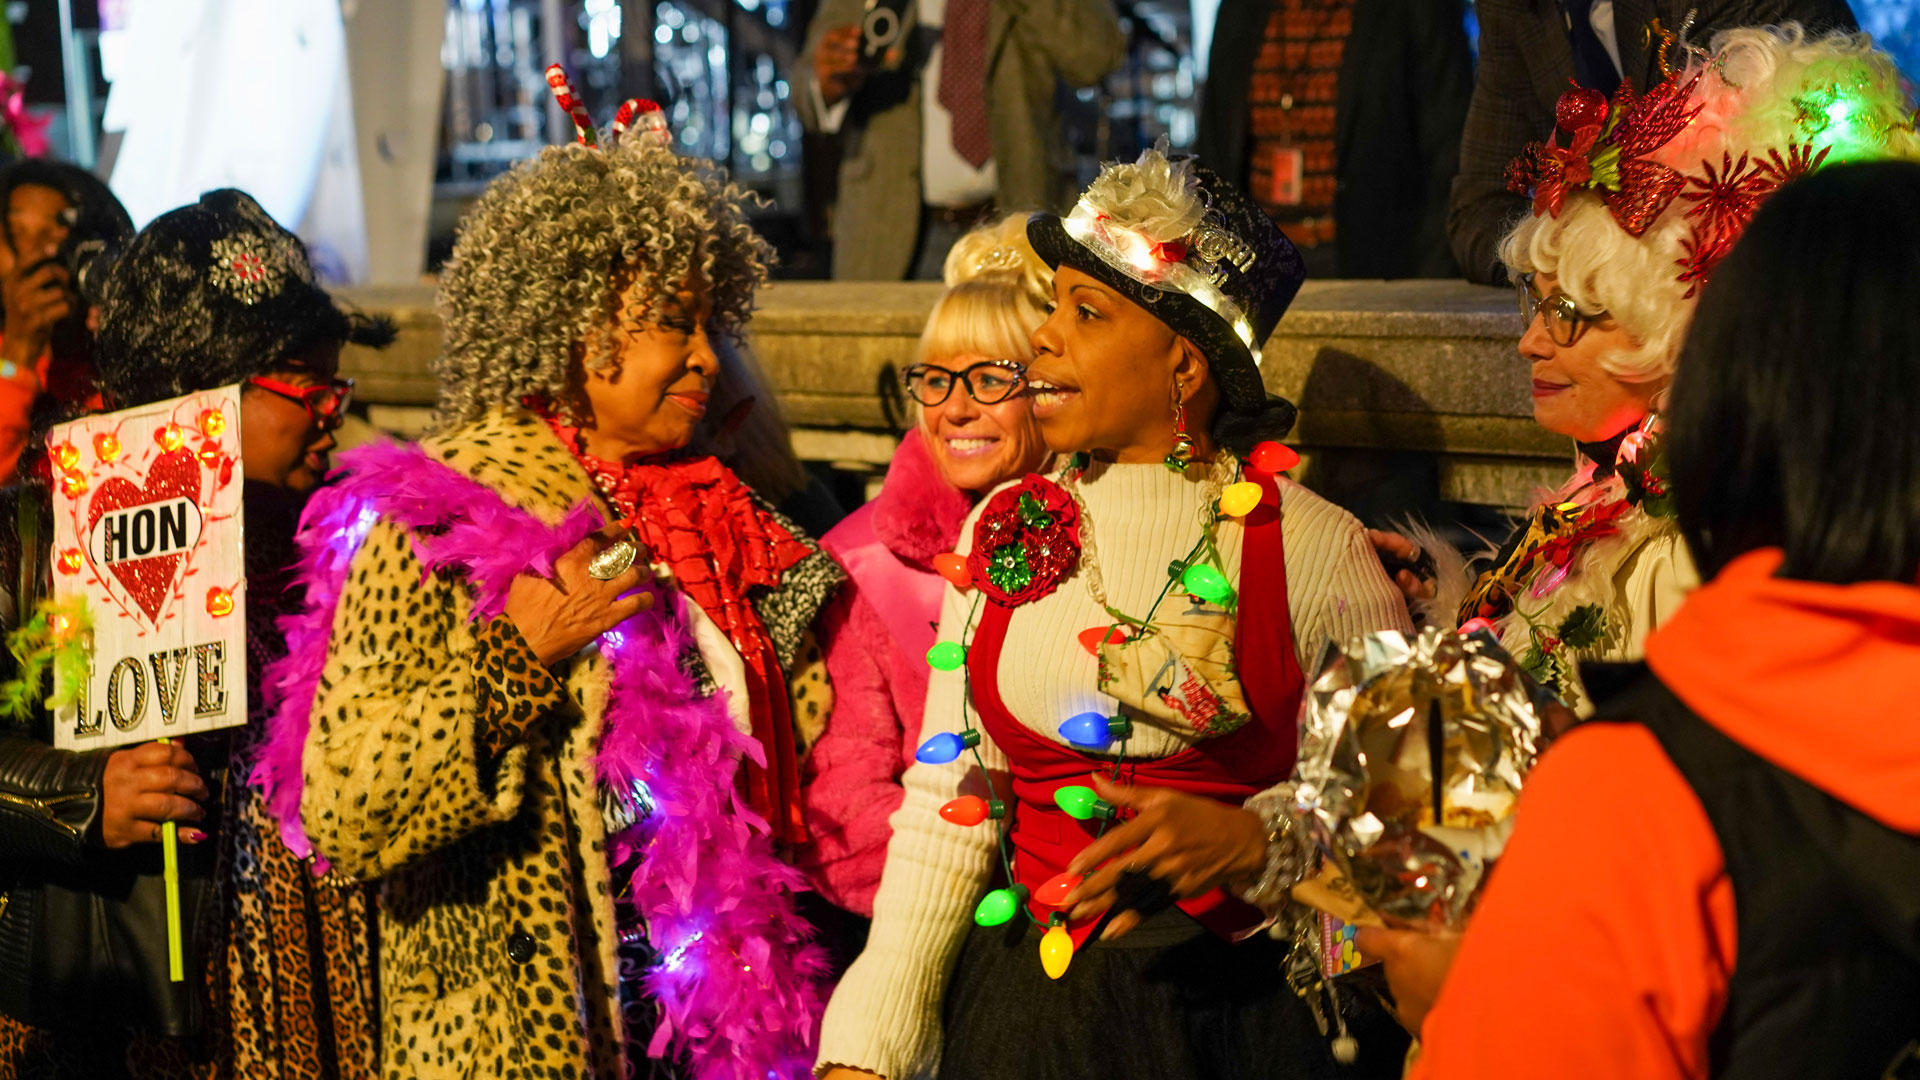 Baltimore Hons dressed up in festive holiday garb during the 50th Annual Monument Lighting in Mount Vernon